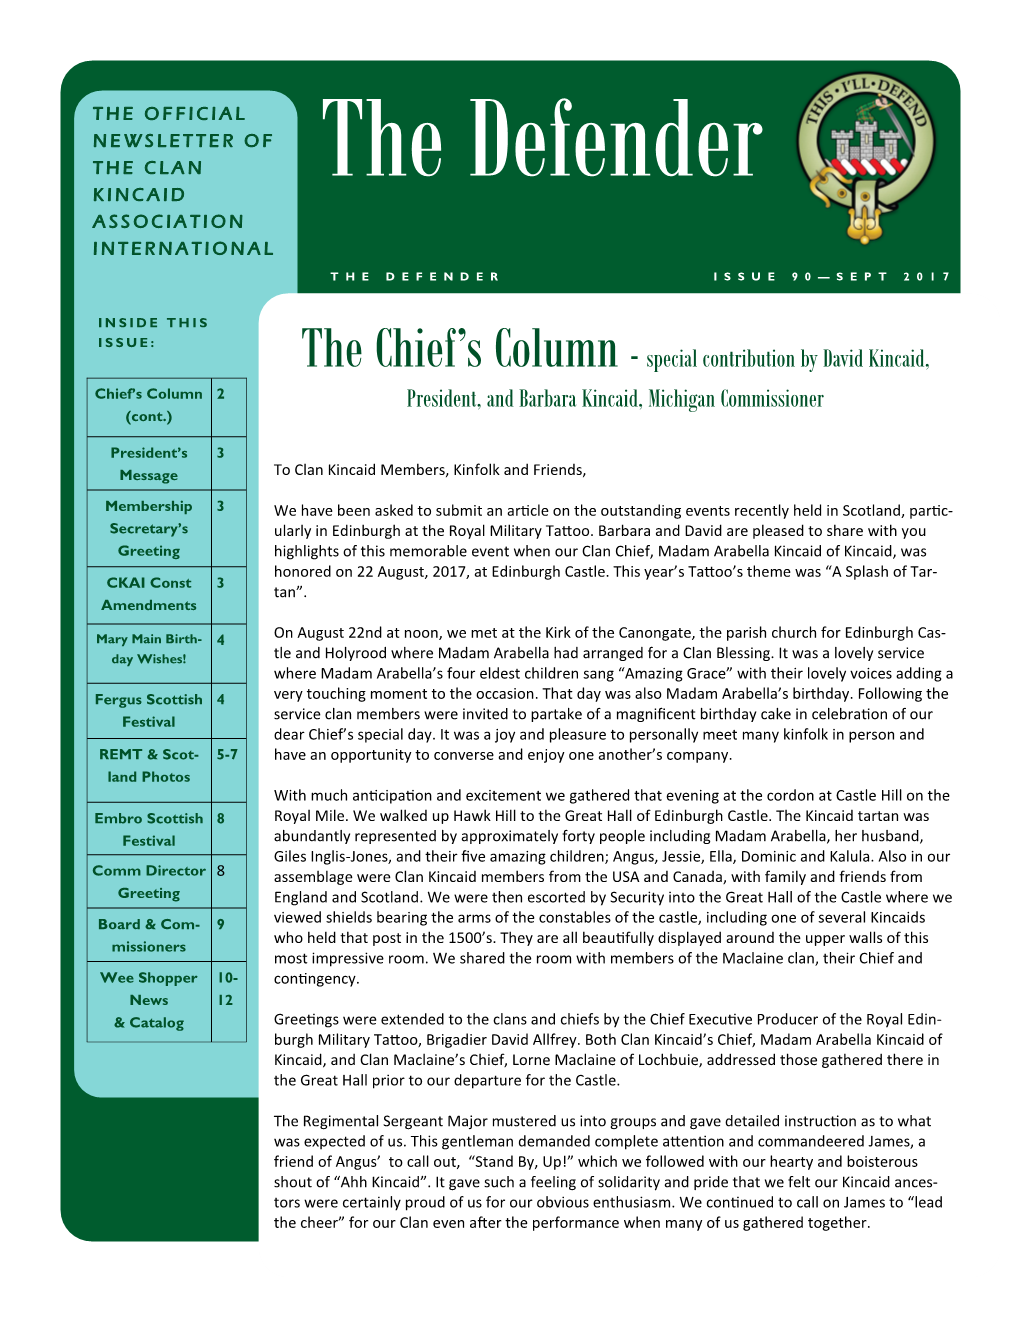 The Chief's Column